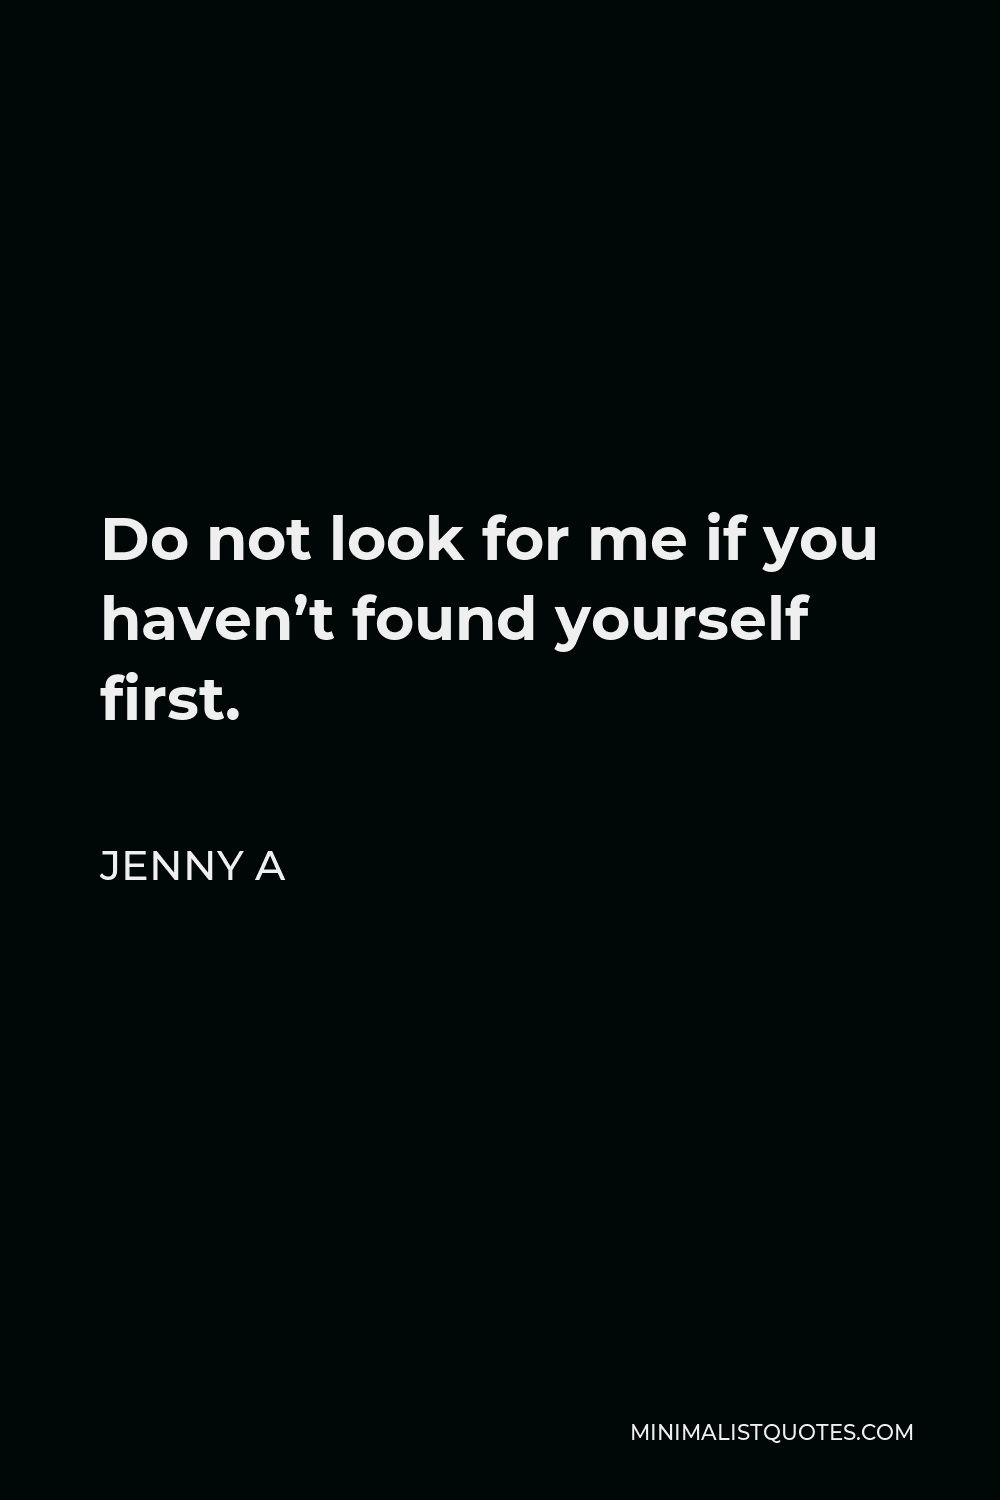 Jenny A Quote - Do not look for me if you haven’t found yourself first.